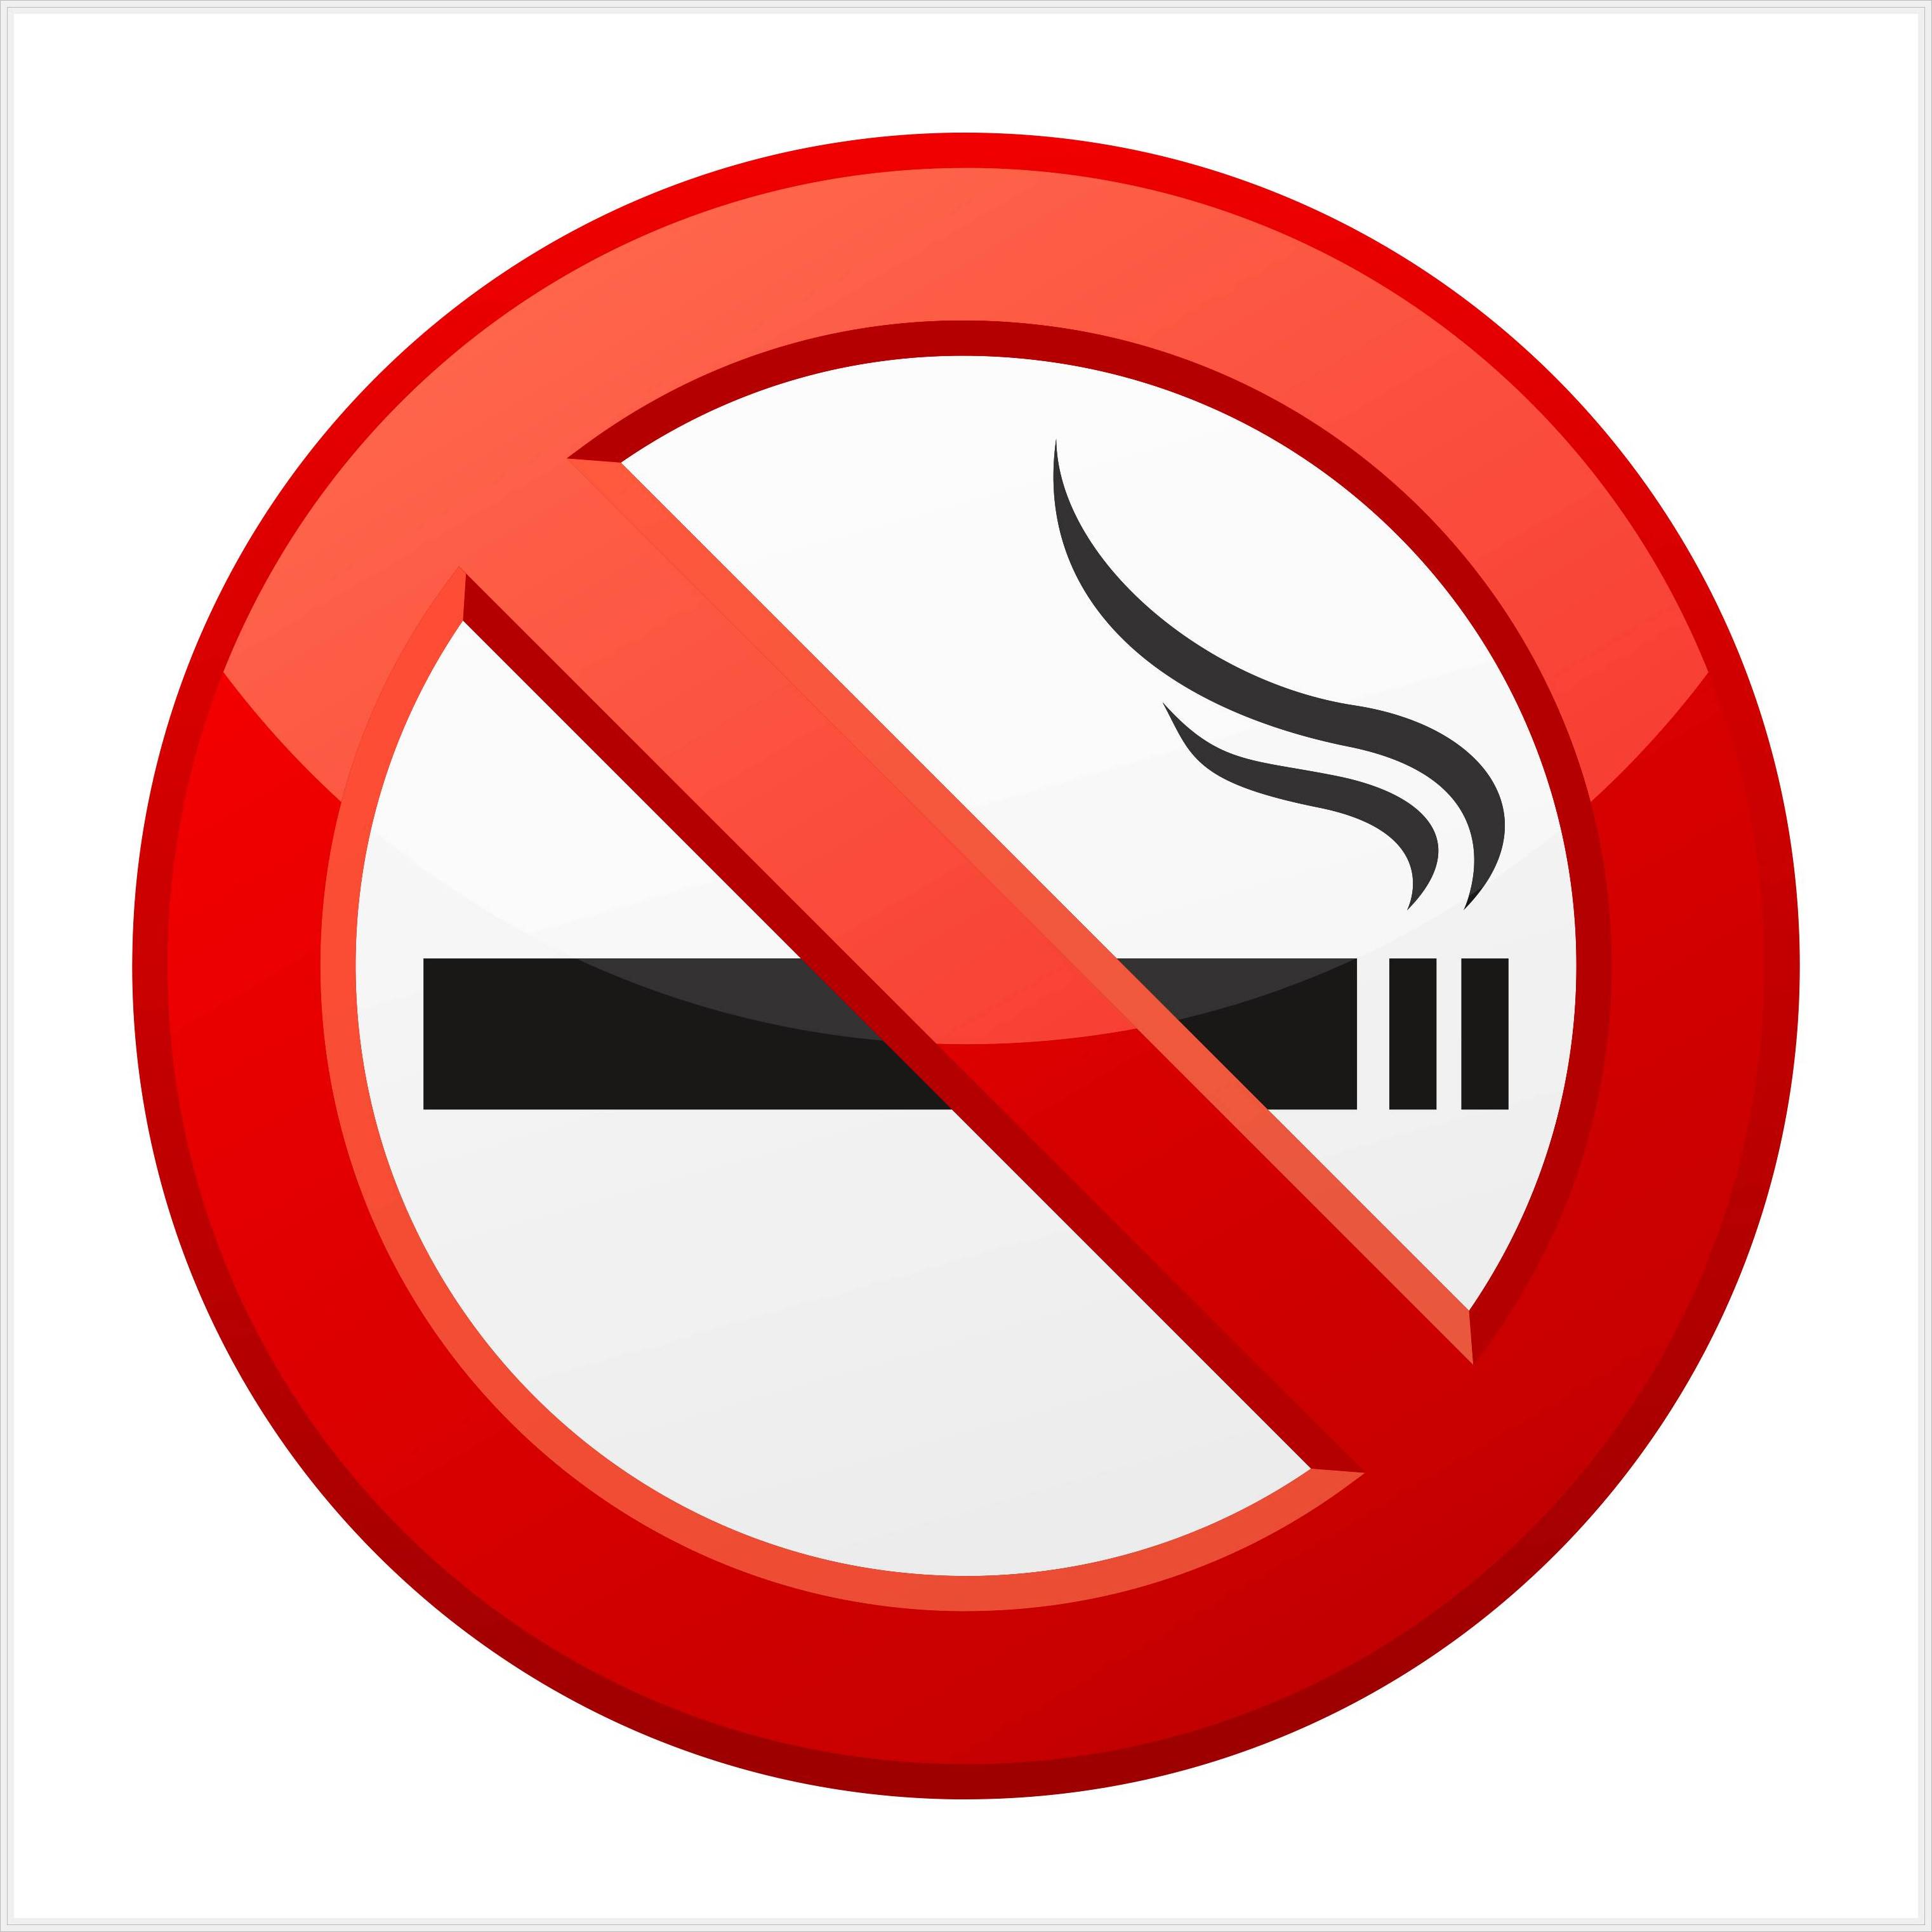 No Smoking Day Hd Wallpapers Images On Secret Hunt 3044x3044PX 3044x3044